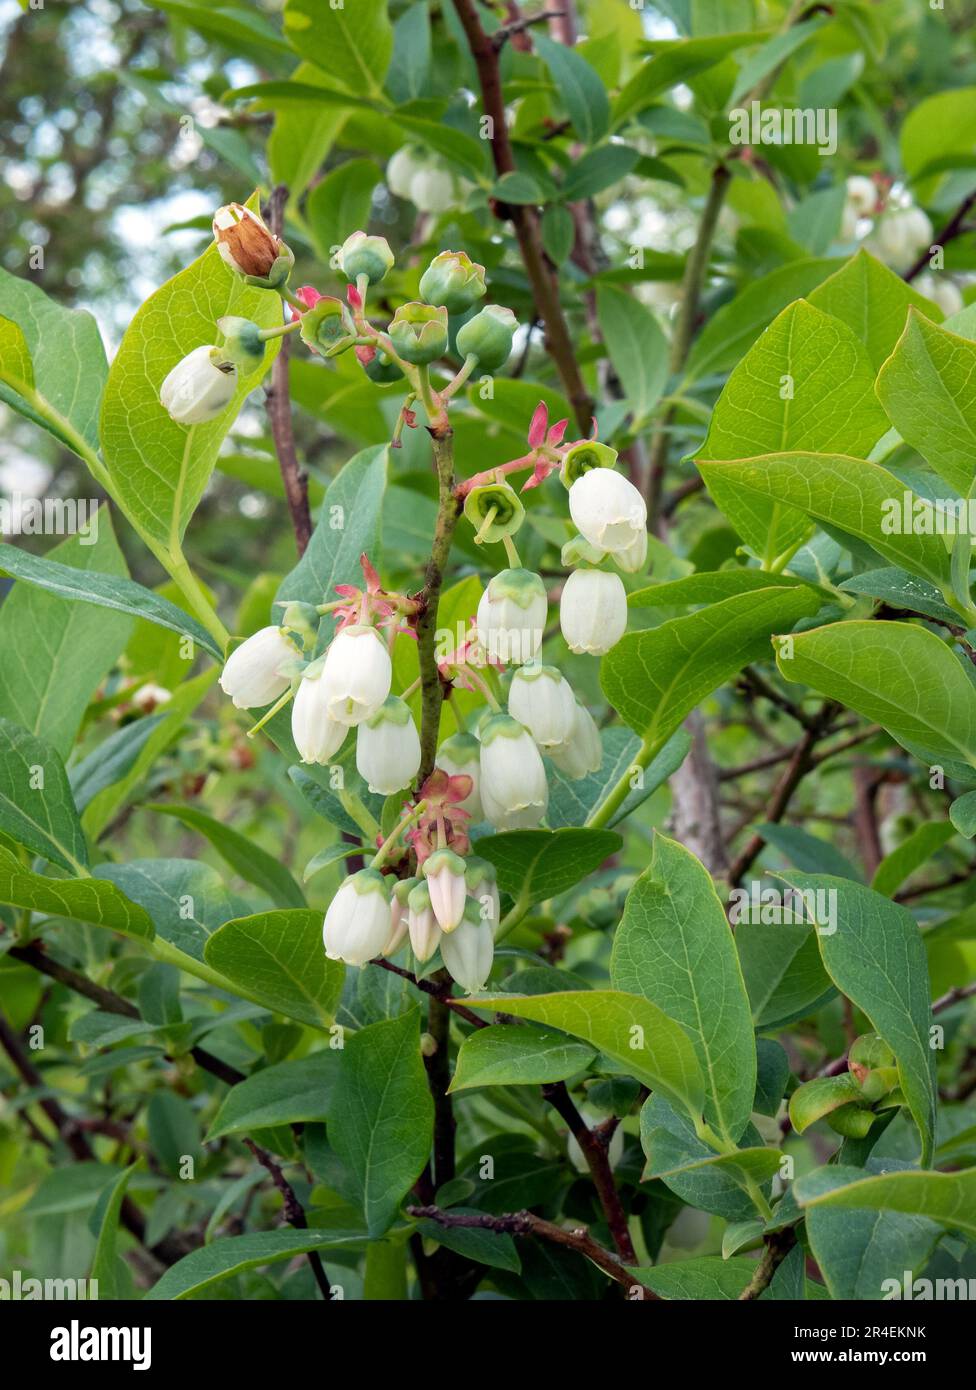 Blueberry flower buds development stage, vertical format. White flowers begin to fall off, showcasing the small green fruits Stock Photo